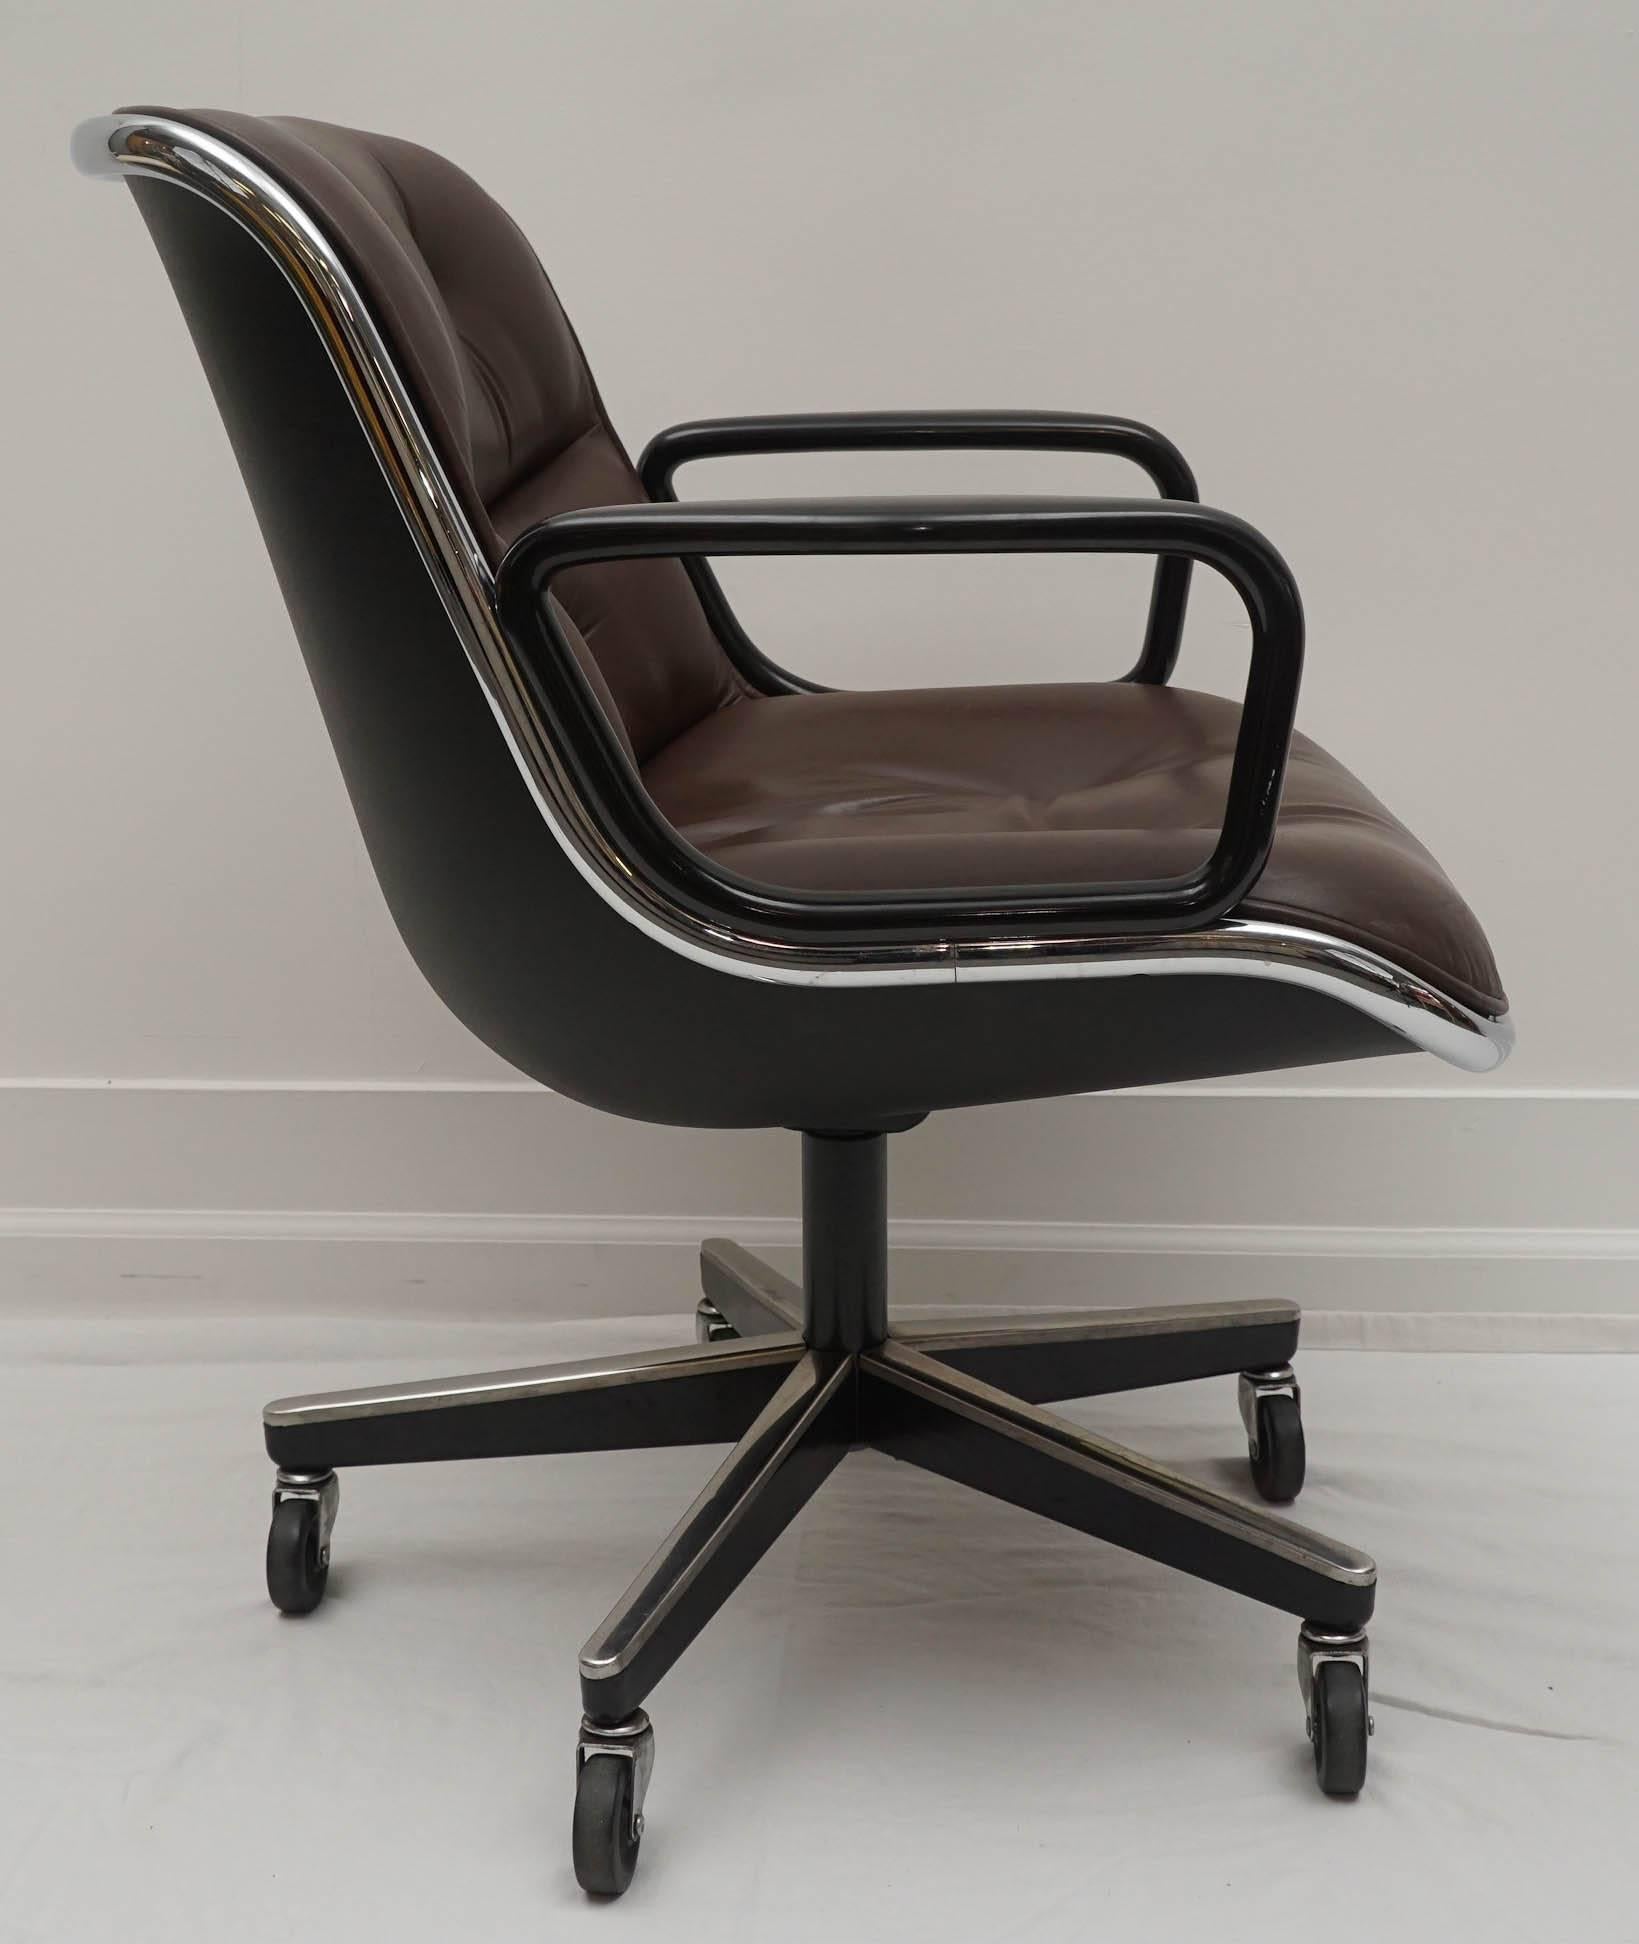 looking for a great set of 8 matching office chairs for your meeting room?
leather with chrome accents.
just picked up this matching set of 8. they are lightly used, in very good condition.
This set surrounded a large oval rosewood Florence Knoll